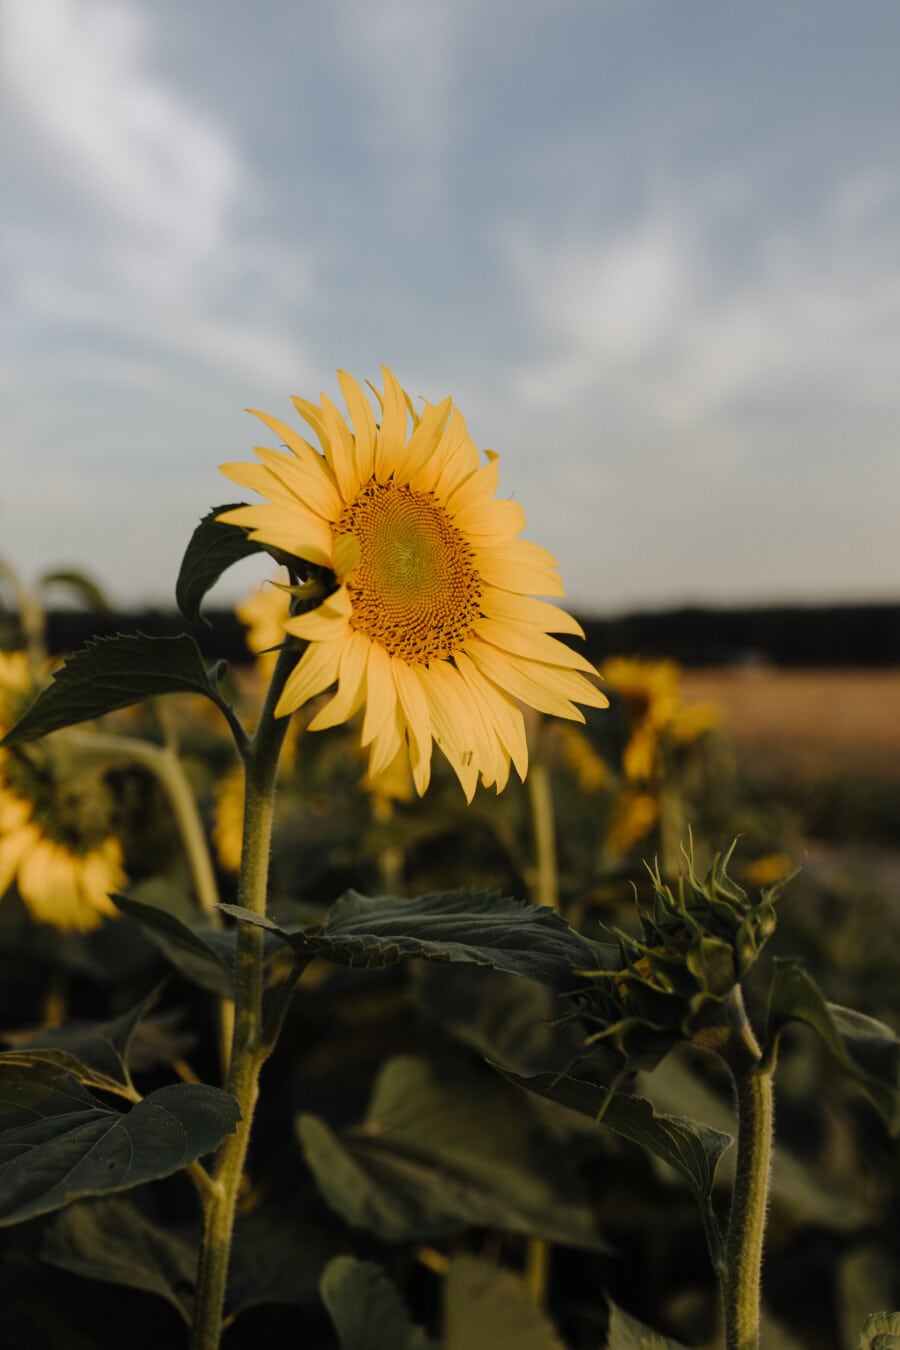 sunflower, sunflower seed, plantation, flat field, products, organic, production, agriculture, summer, nature